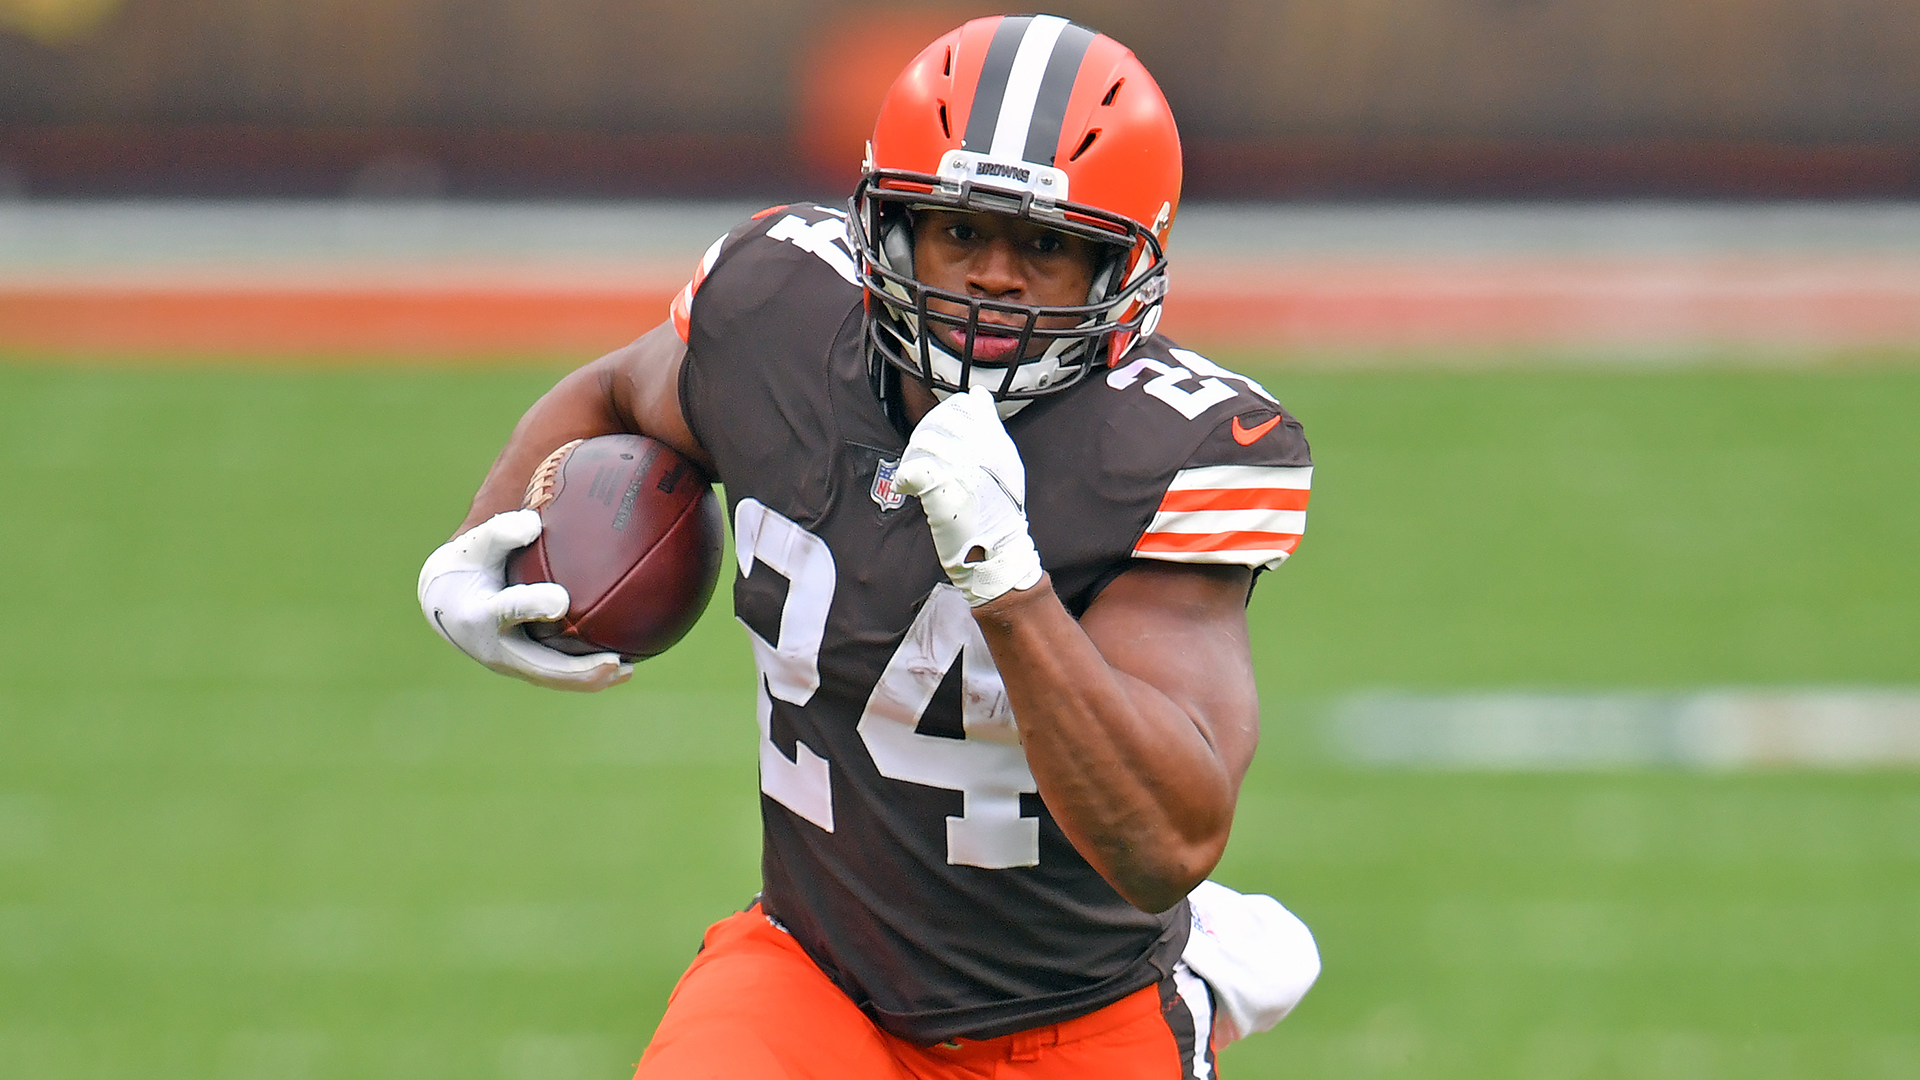 How will Browns' Nick Chubb perform in 2021?